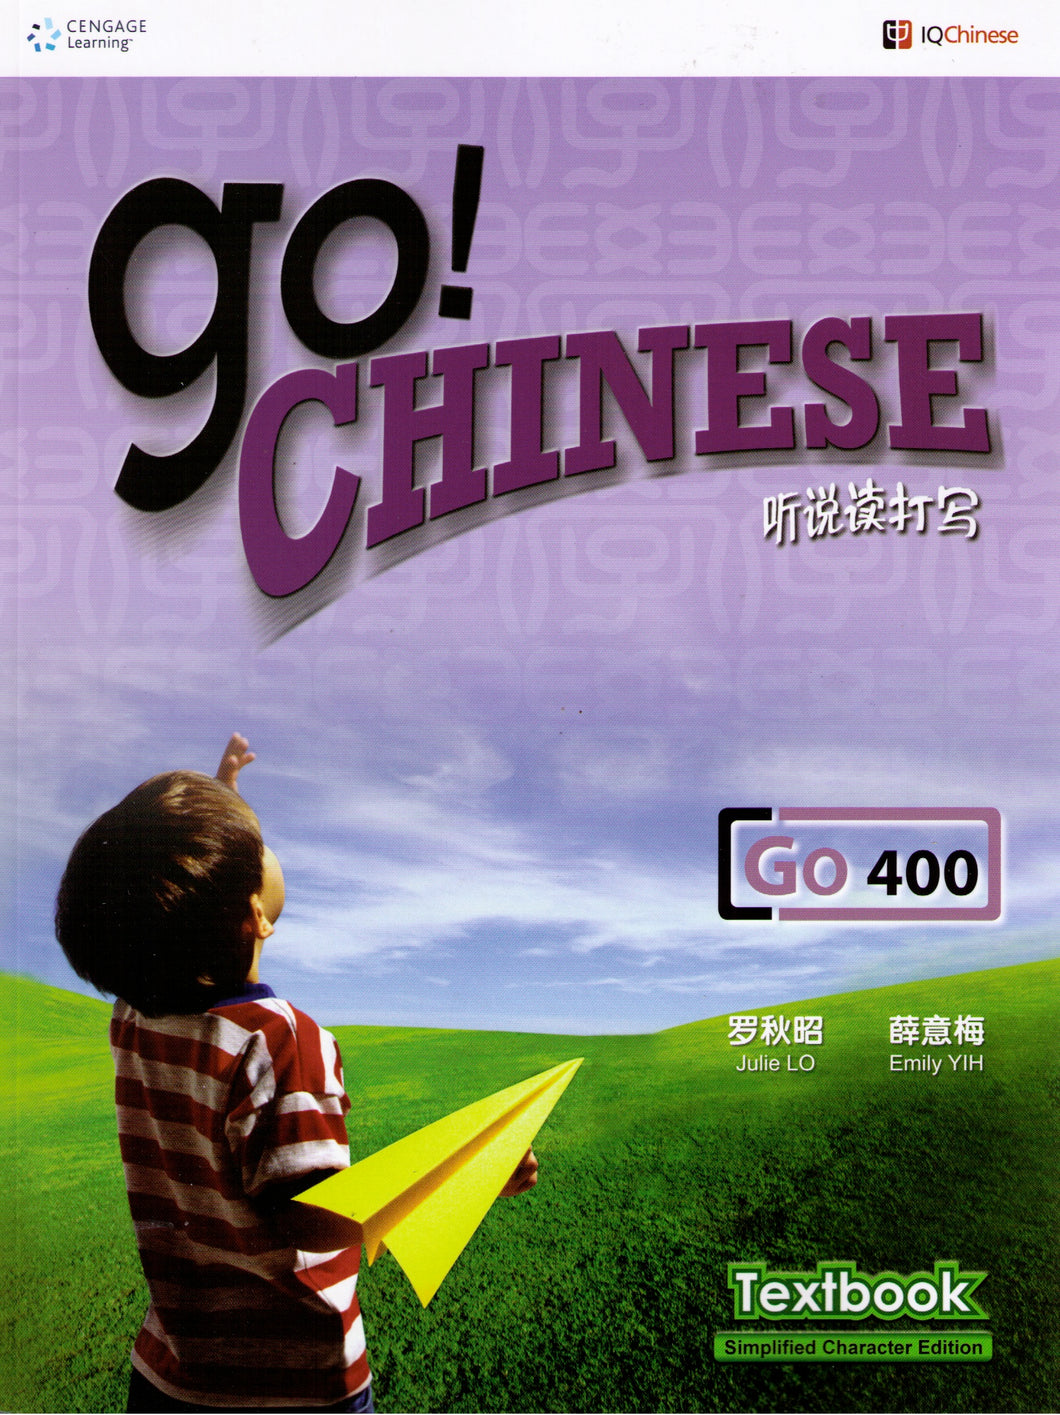 Go Chinese and IQ Chinese 400-Textbook-Simplified